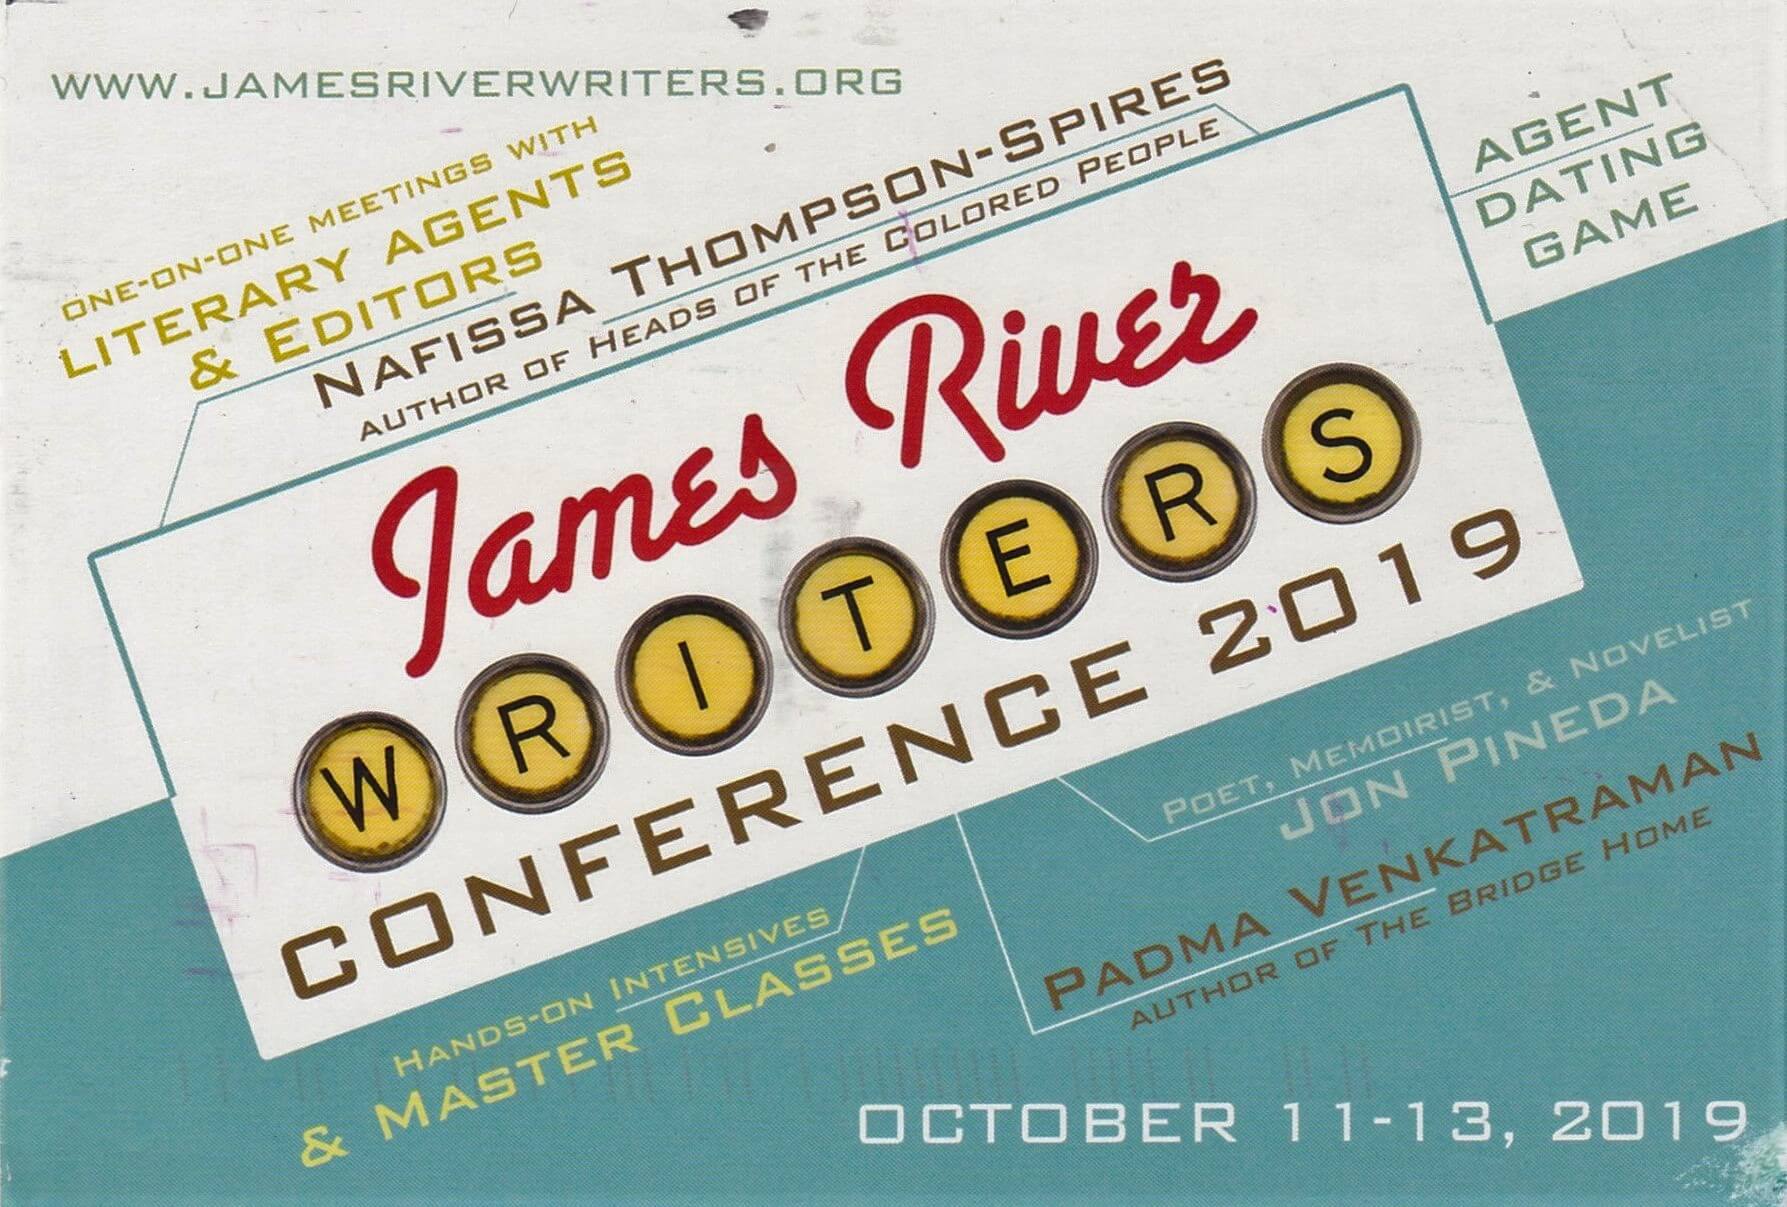 James River Writers Conference Be There! » Postcards & Authors